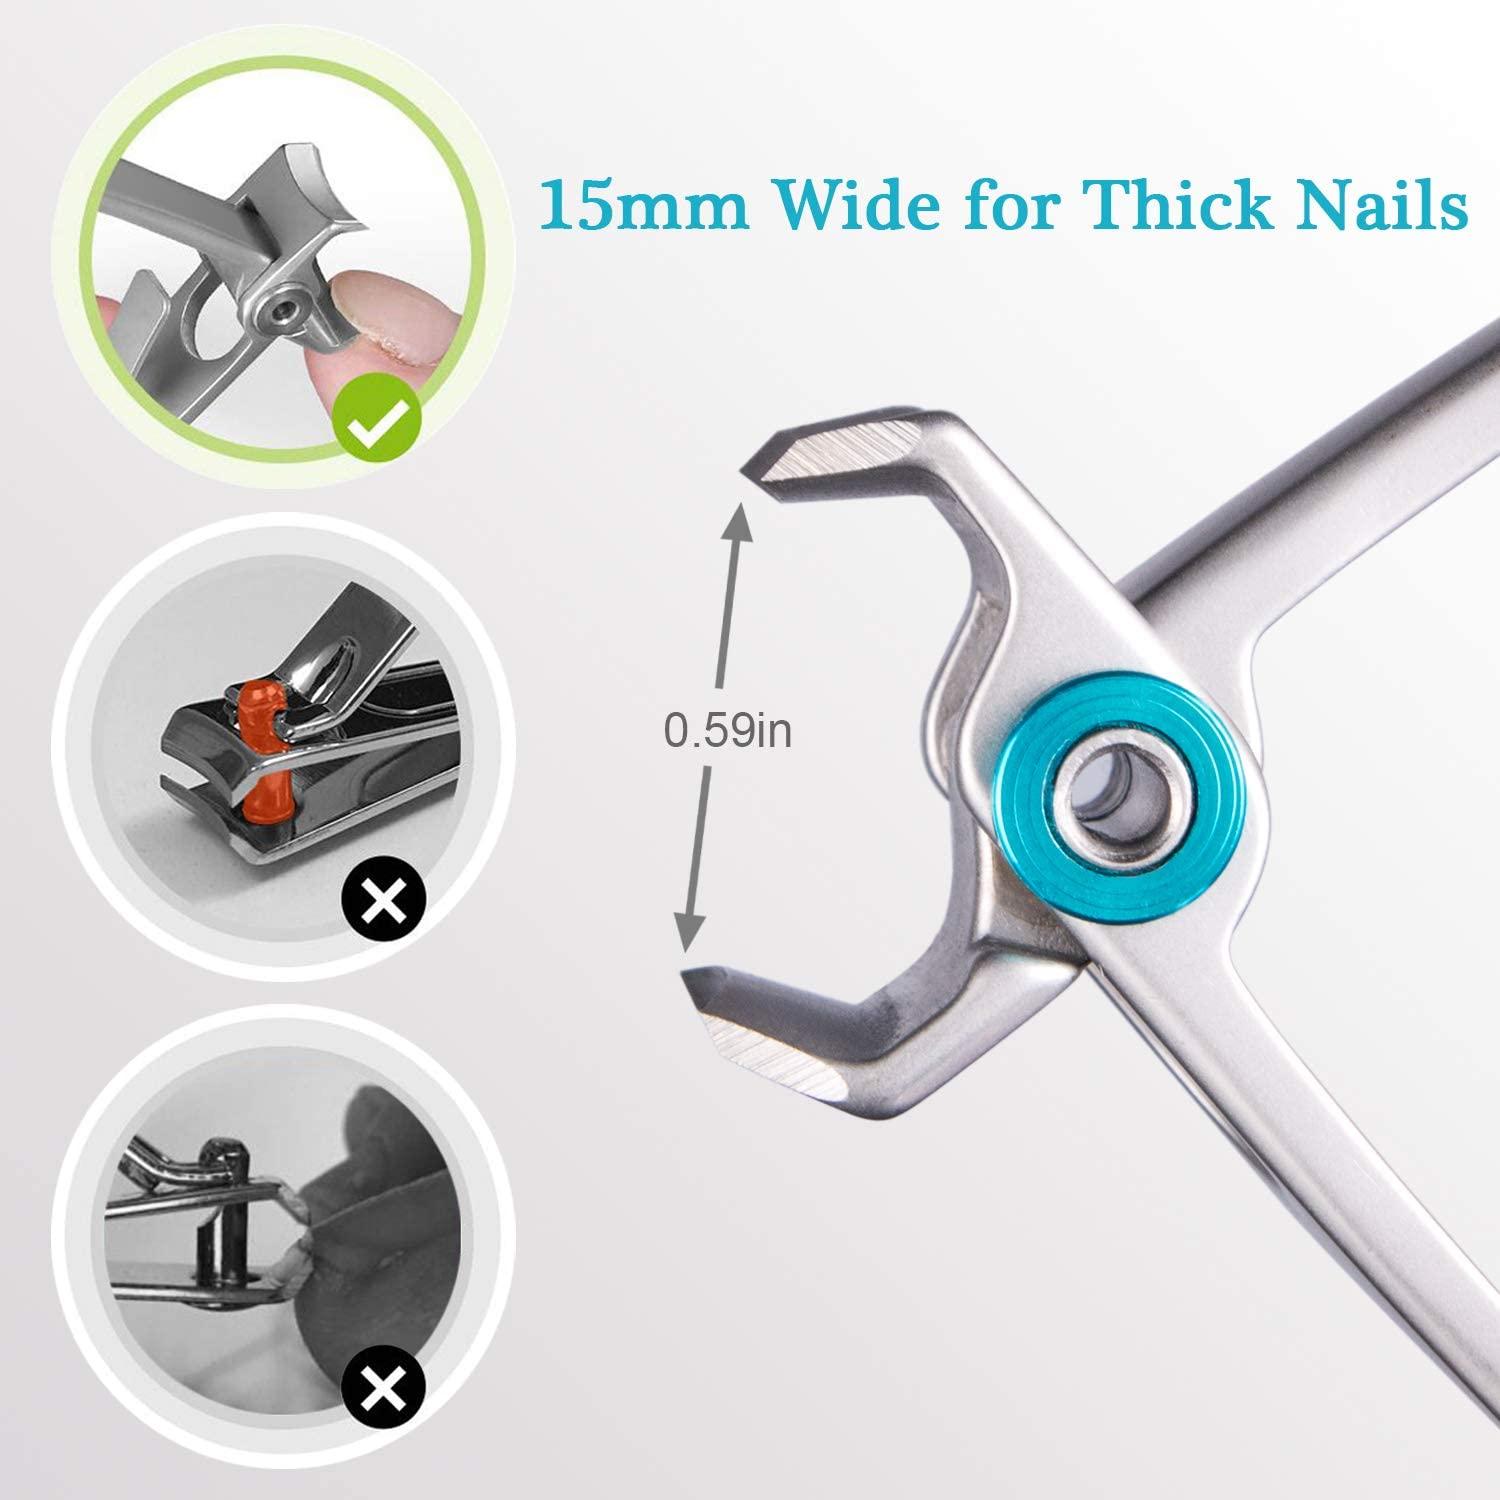 Nail Clippers for Thick Nails 15mm Wide Jaw Opening Extra Large